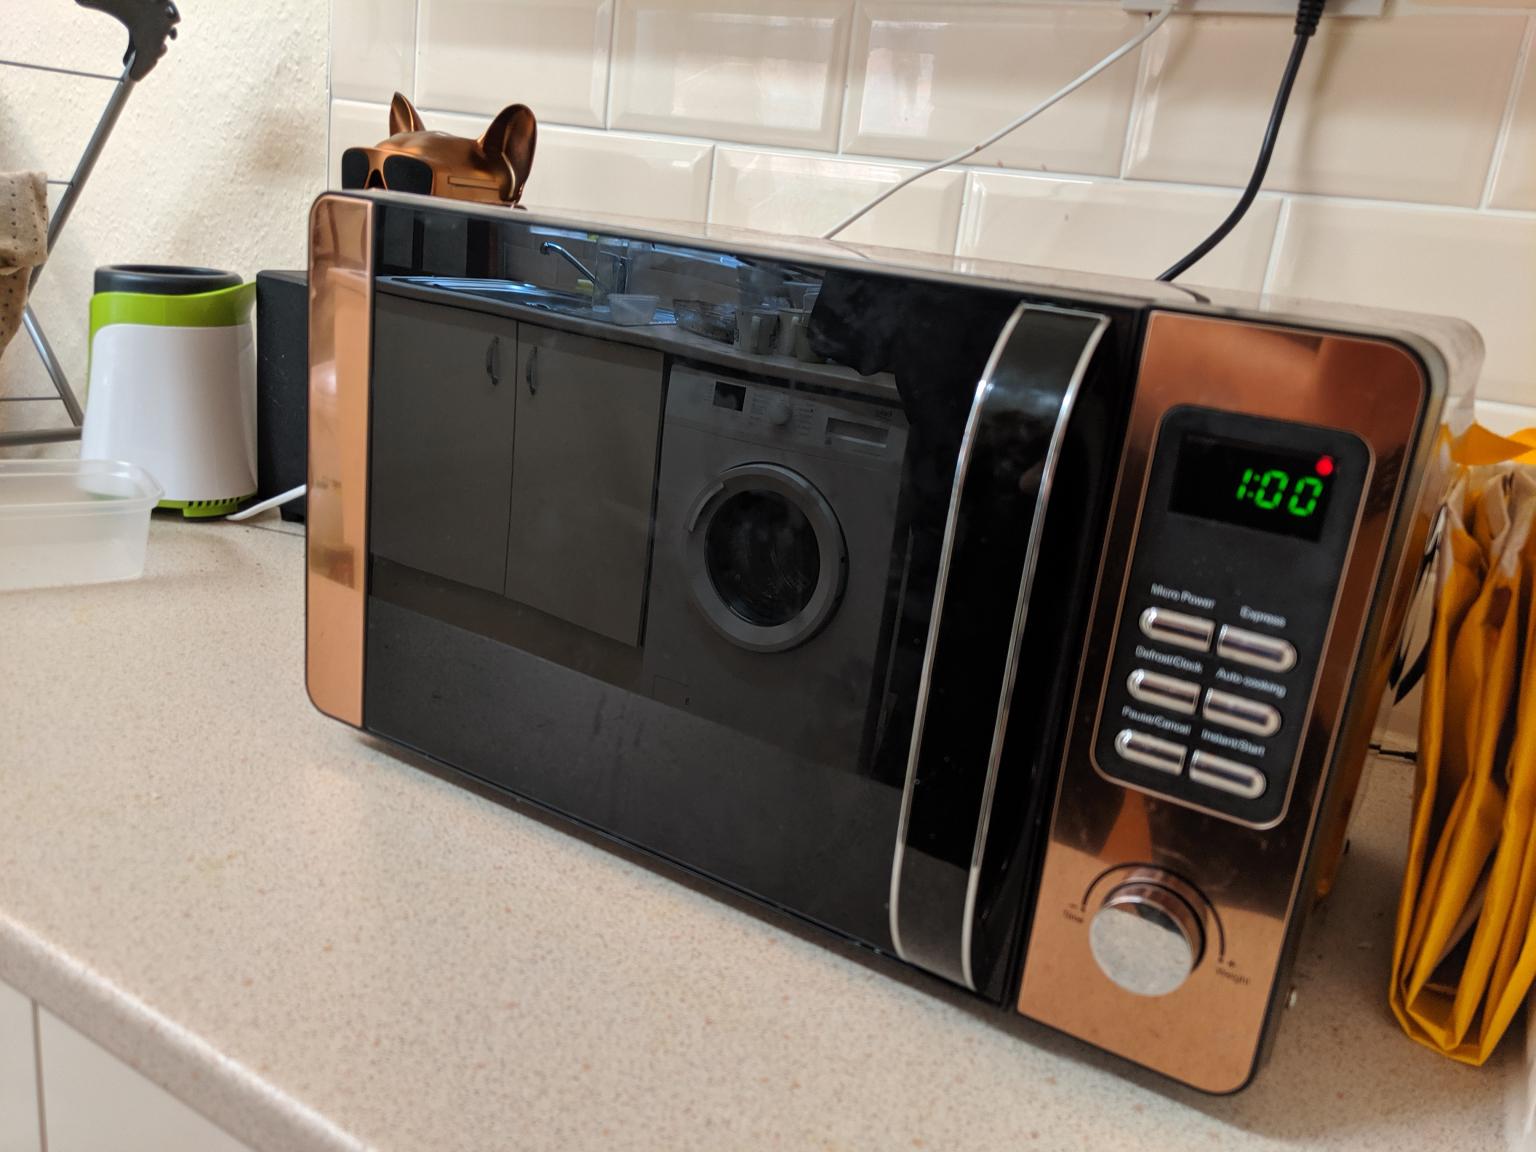 COPPER MICROWAVE in DE1 Derby for £40.00 for sale | Shpock